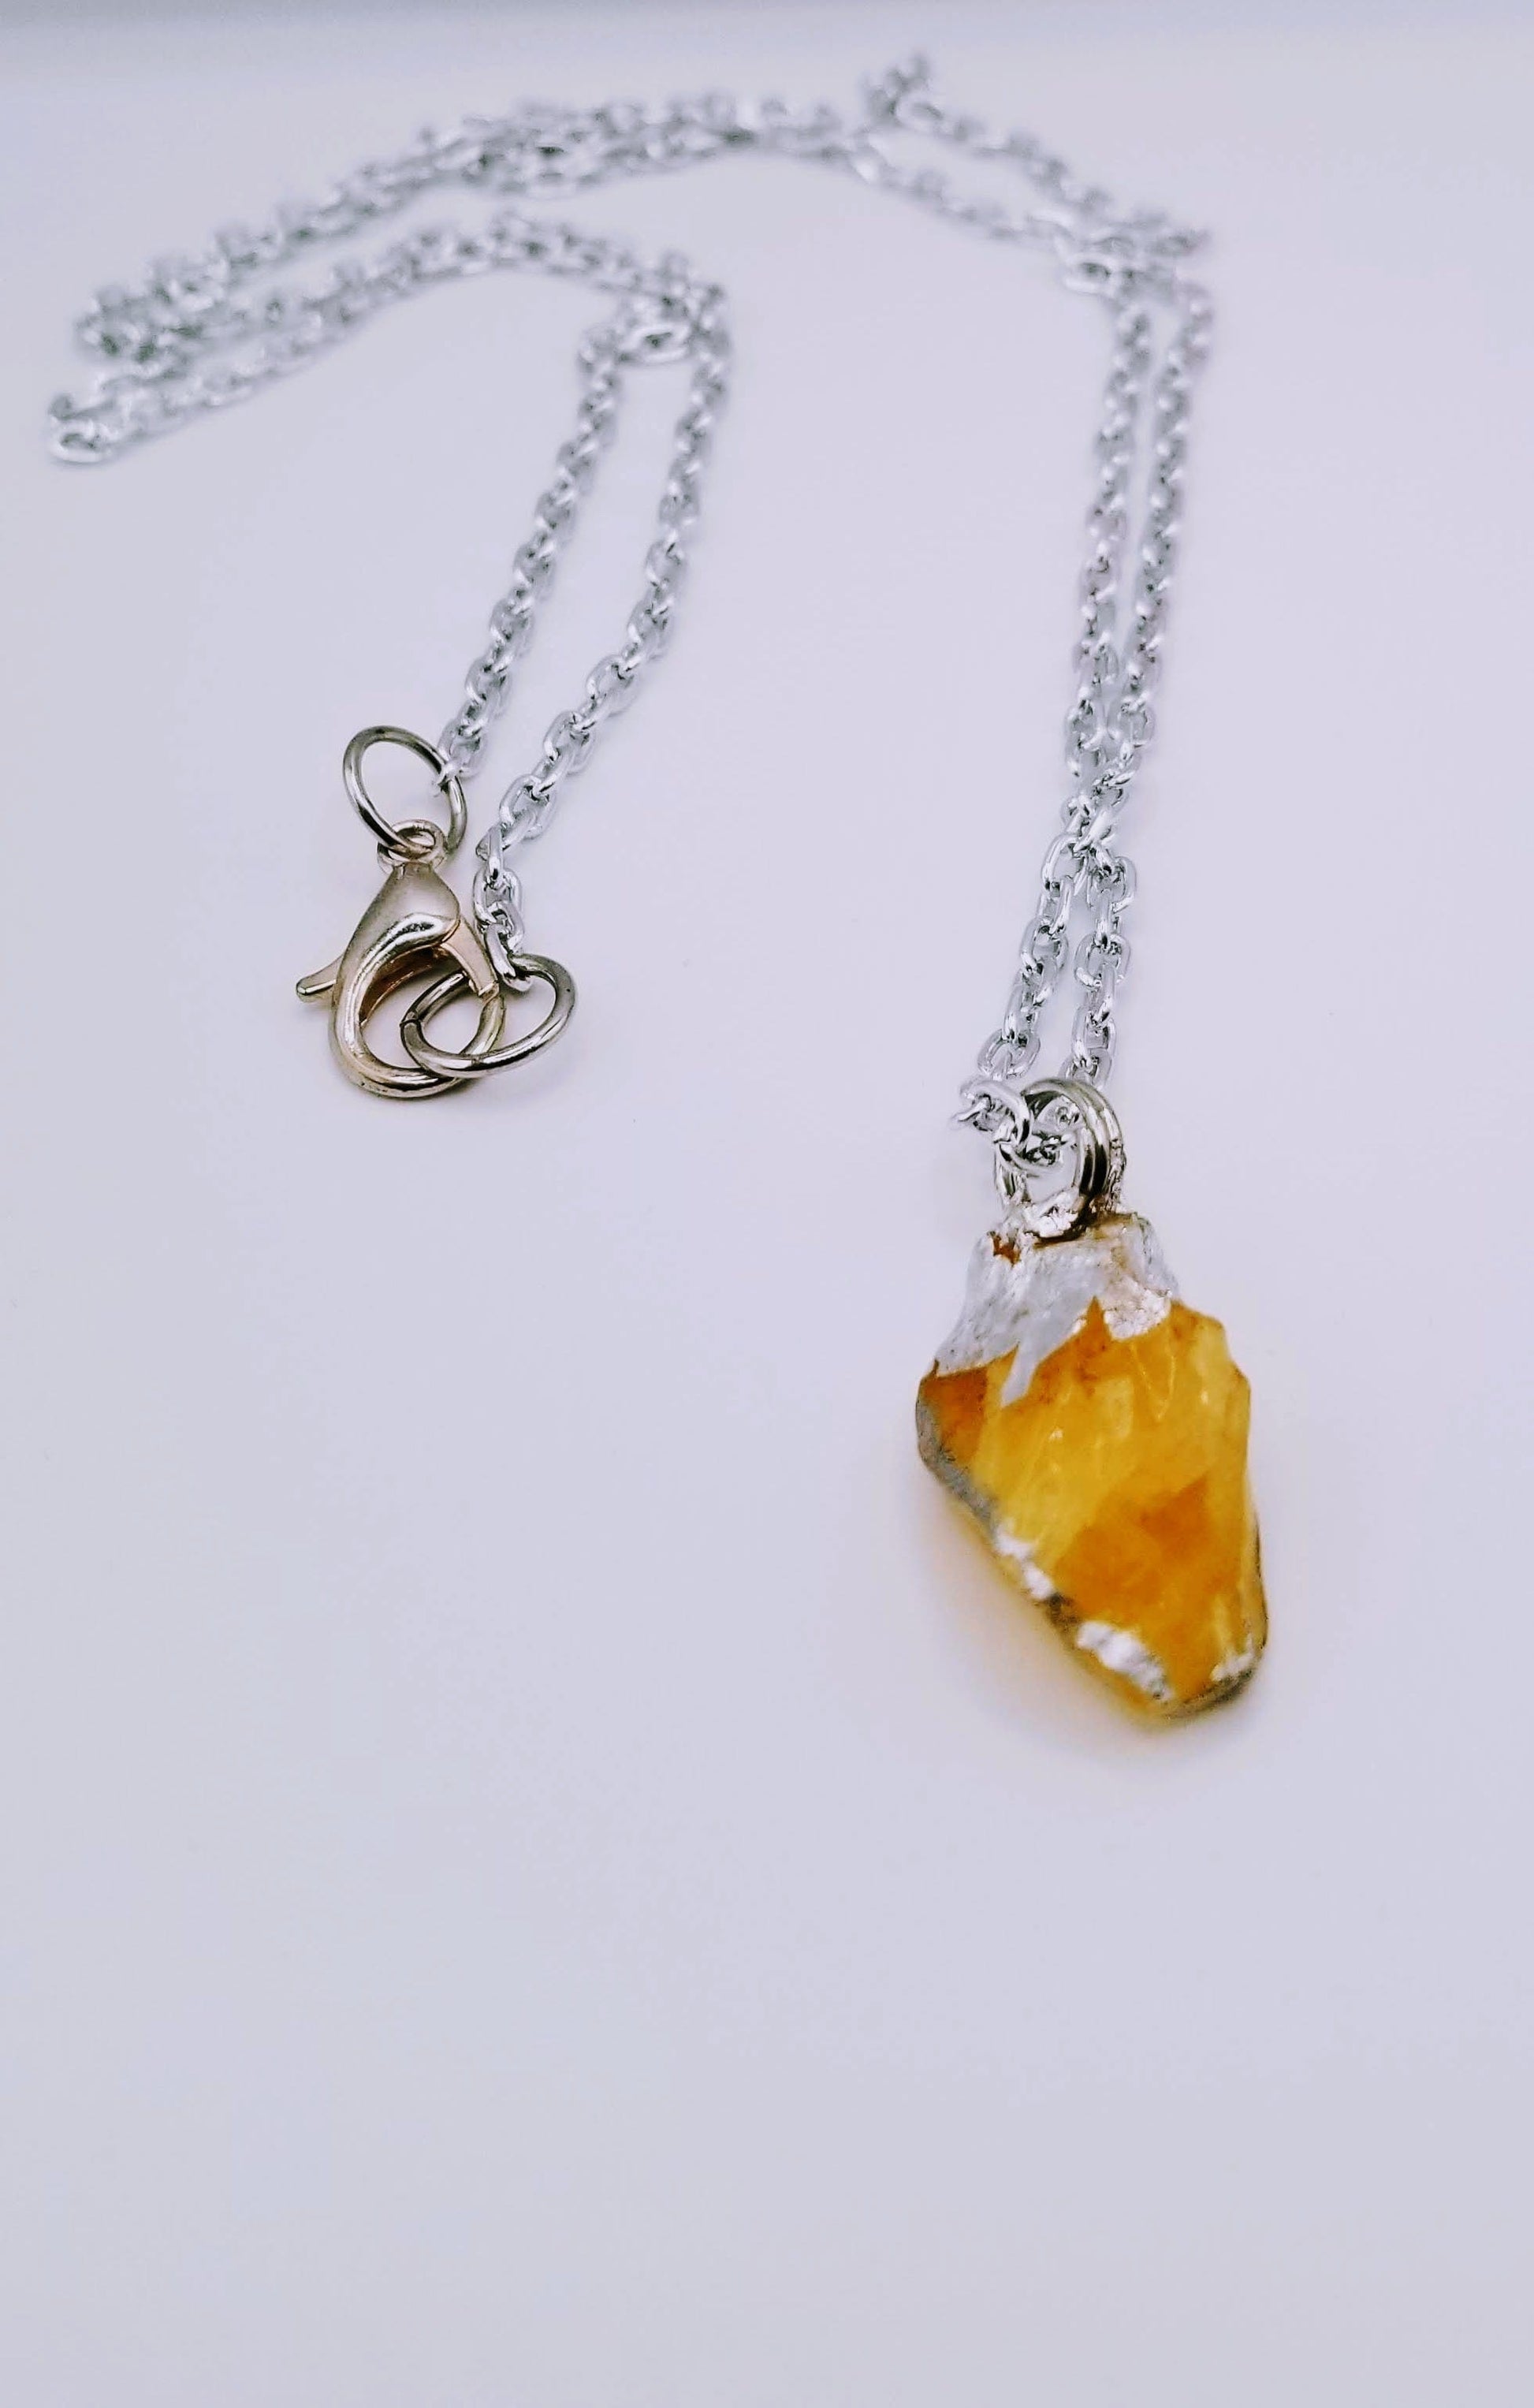 Handcrafted Jewelry By Teri C Necklace Orange quartz with Silverleaf Pendant on silver tone chain